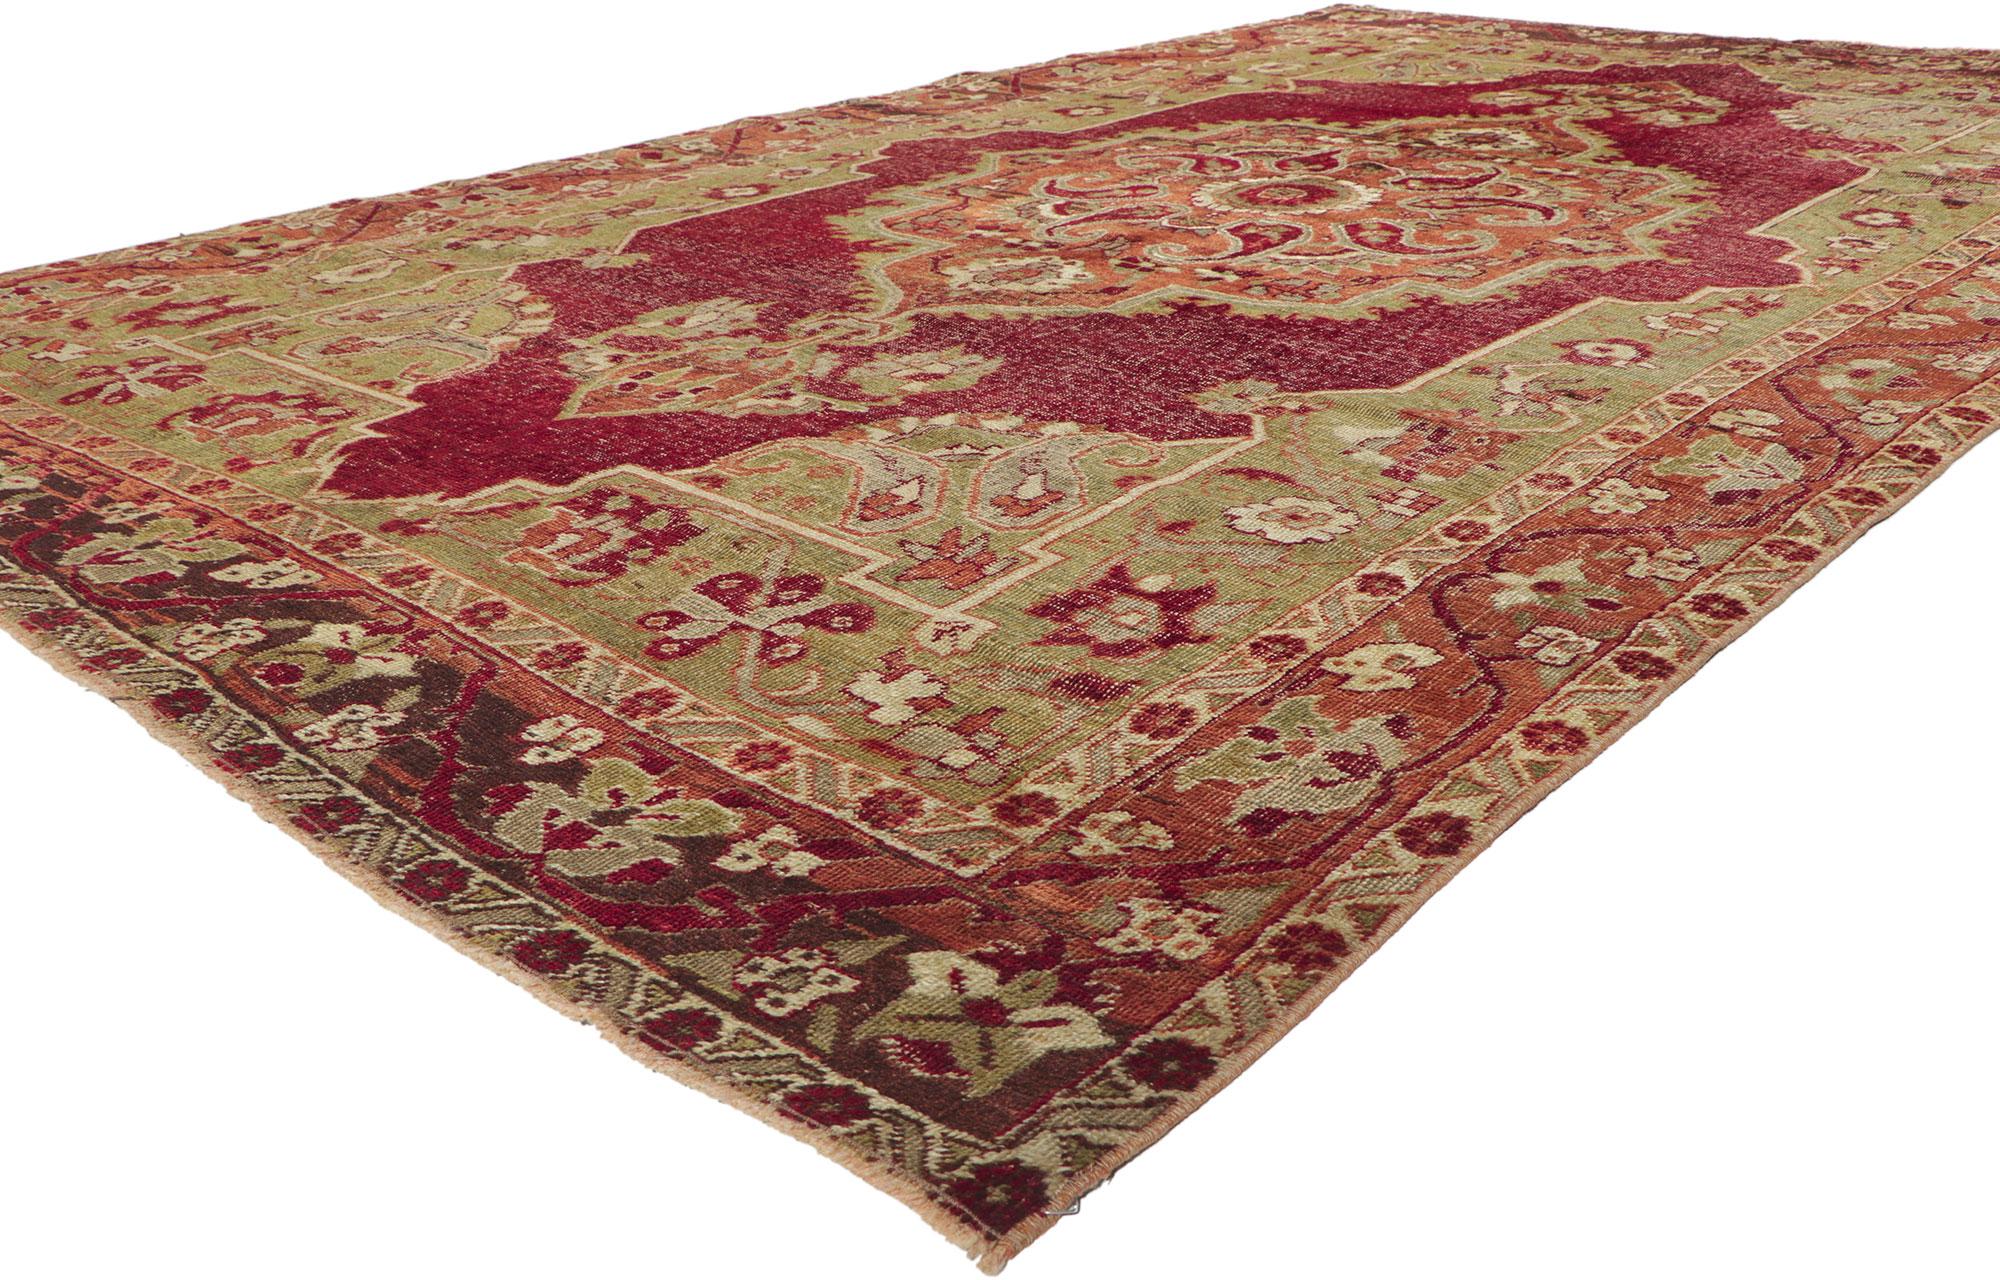 52037 distressed vintage Turkish Sivas rug with Traditional style 06'09 x 11'05. 
With its rugged beauty and timeless style, this hand-knotted wool distressed vintage Turkish Sivas rug is poised to impress. The lovingly time-worn field features an